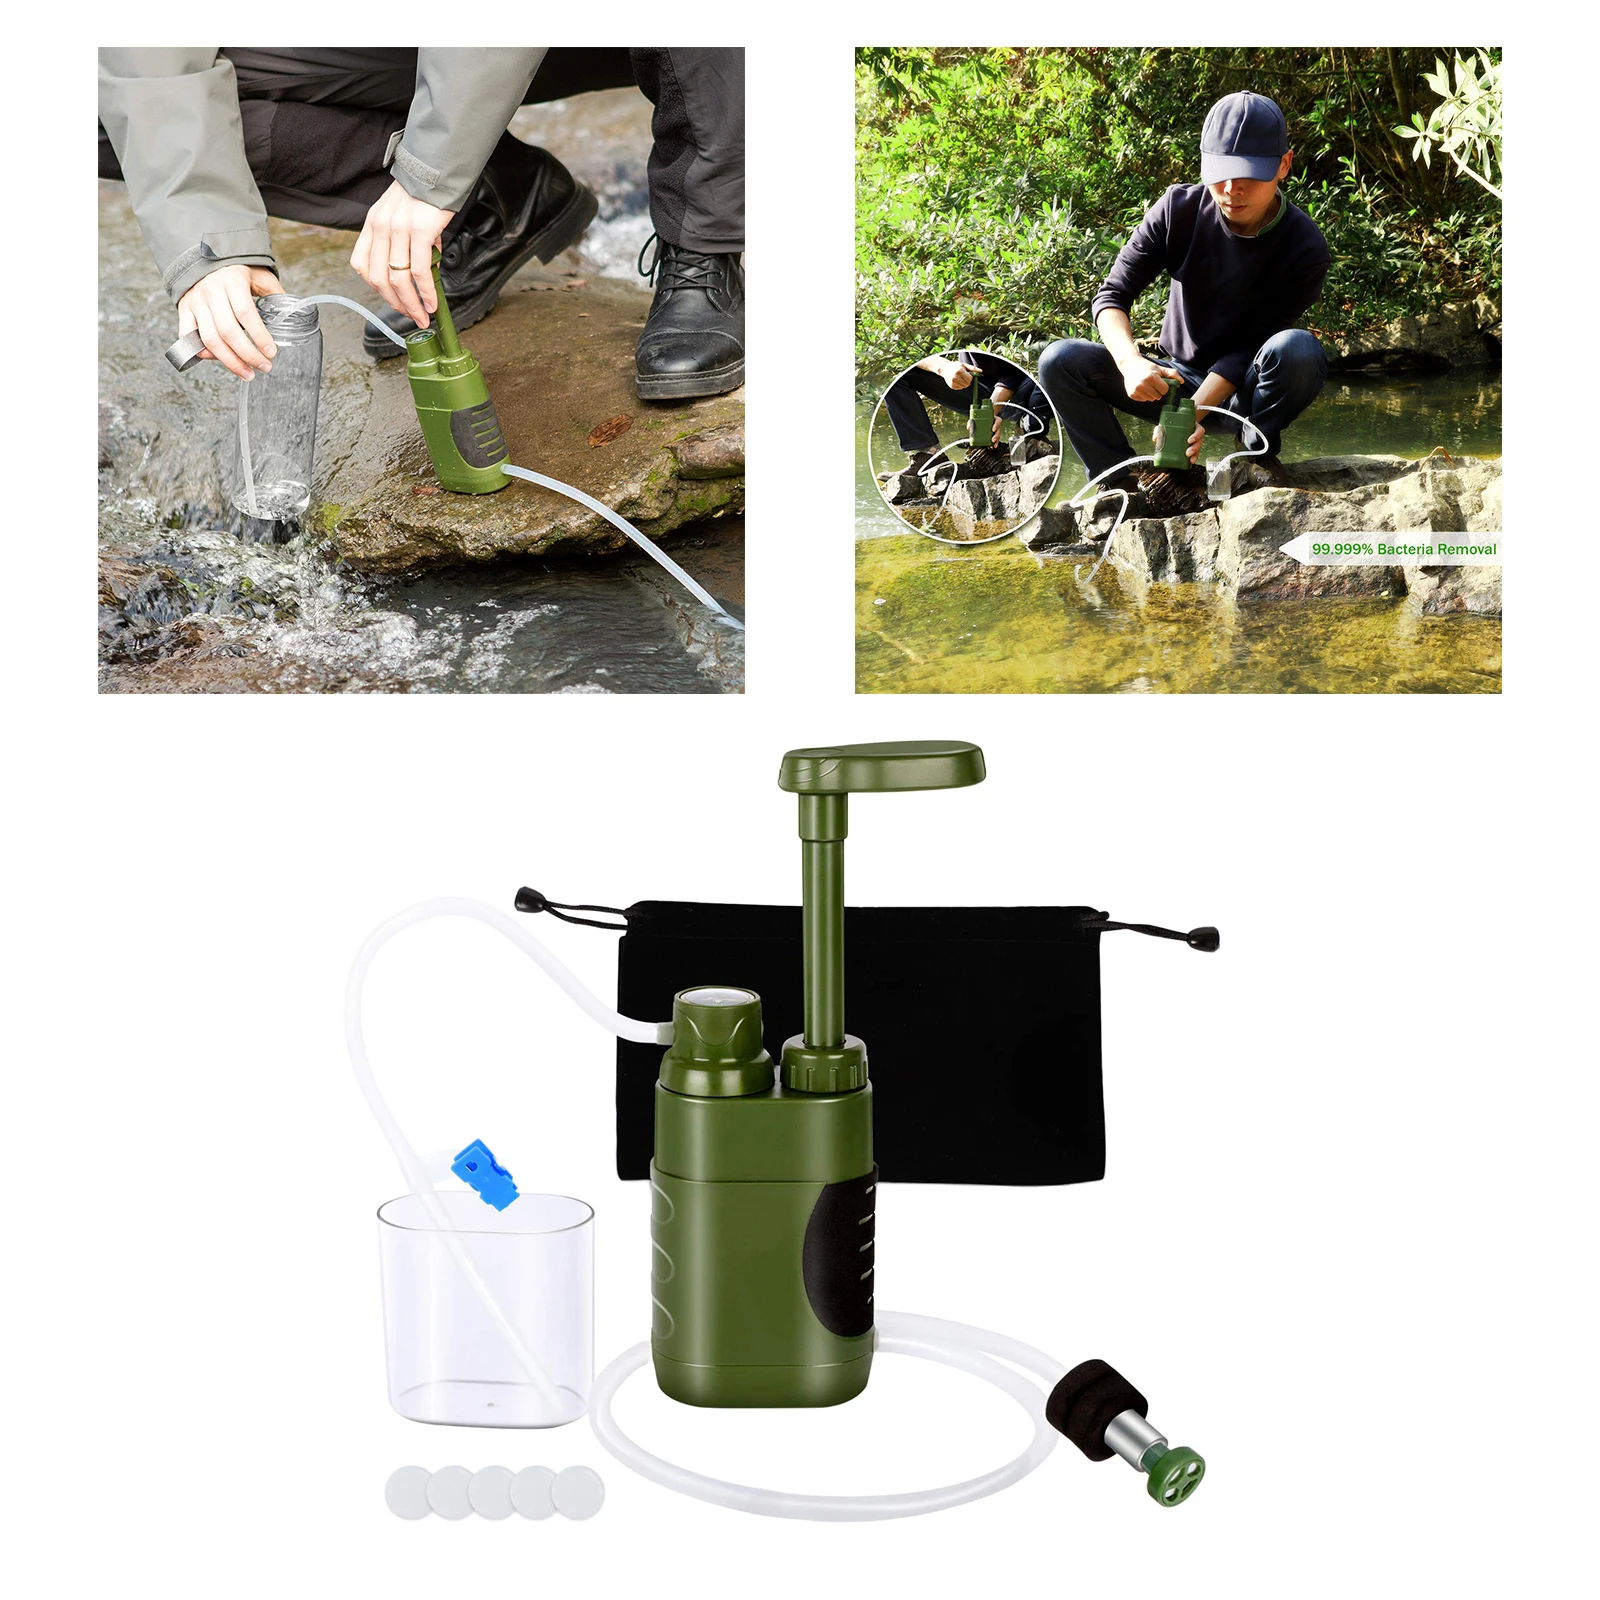 Portable Outdoor Survival Water Filter Personal Gravity Purifier Filtration, for Outdoor Camping Hiking